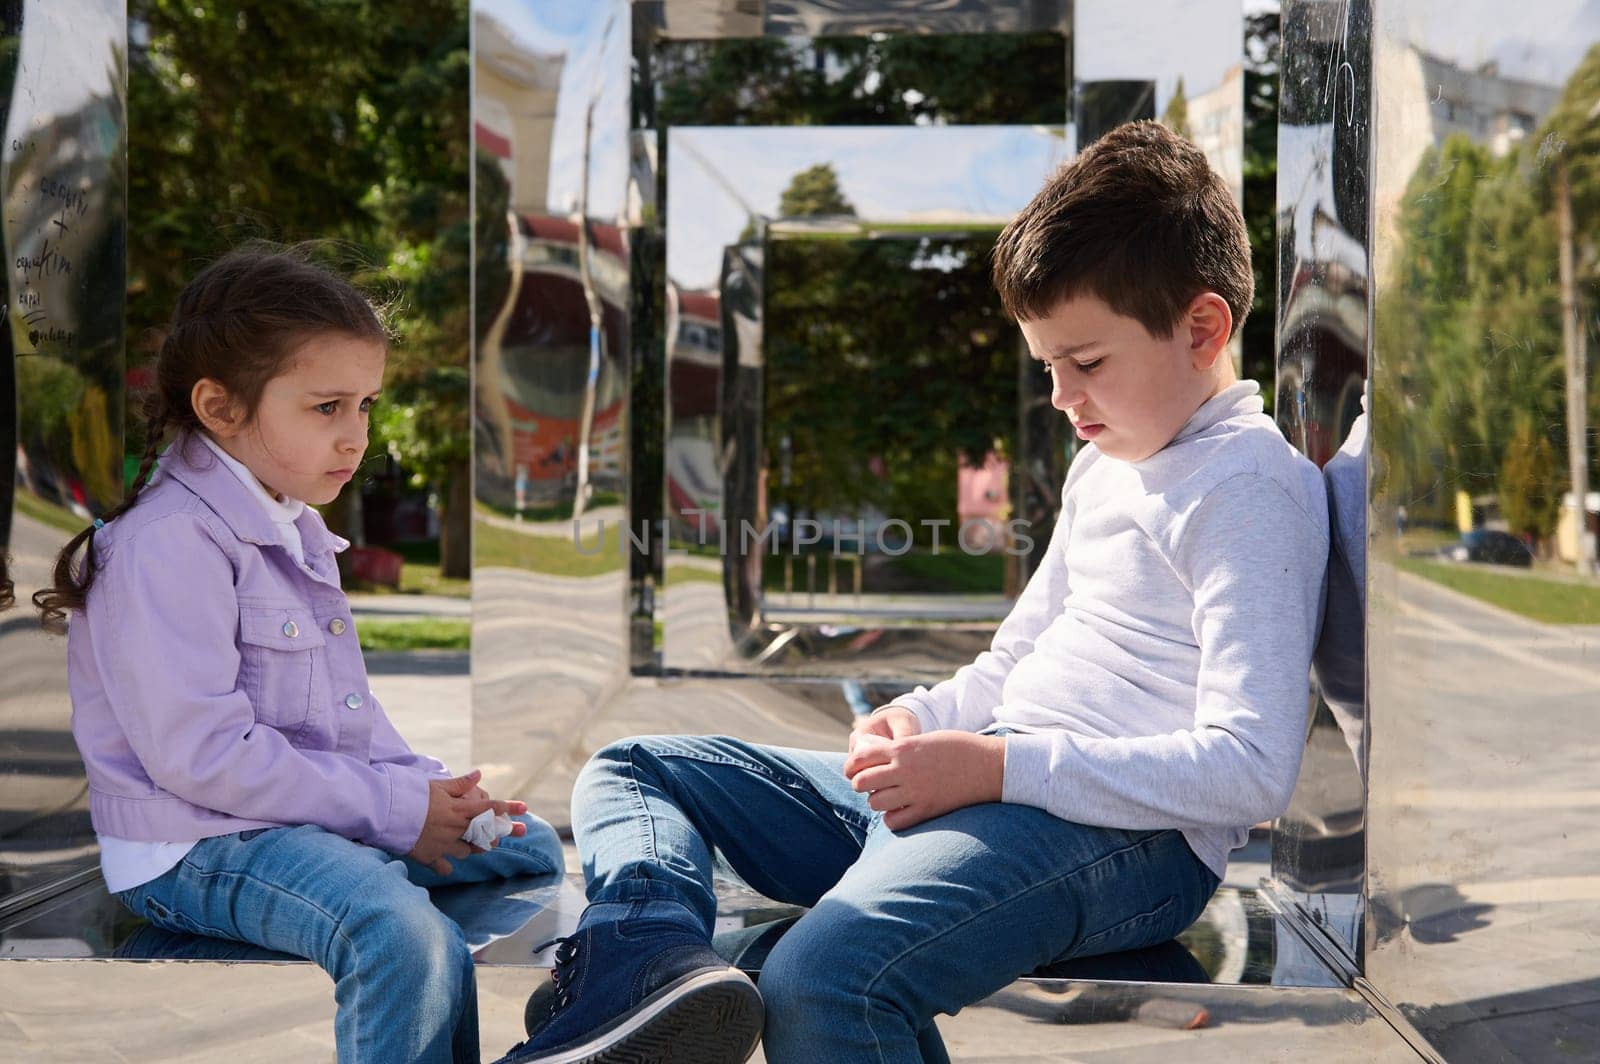 Adorable children, brother and sister sitting on mirror bench in urban park, looking sad during family outing. by artgf